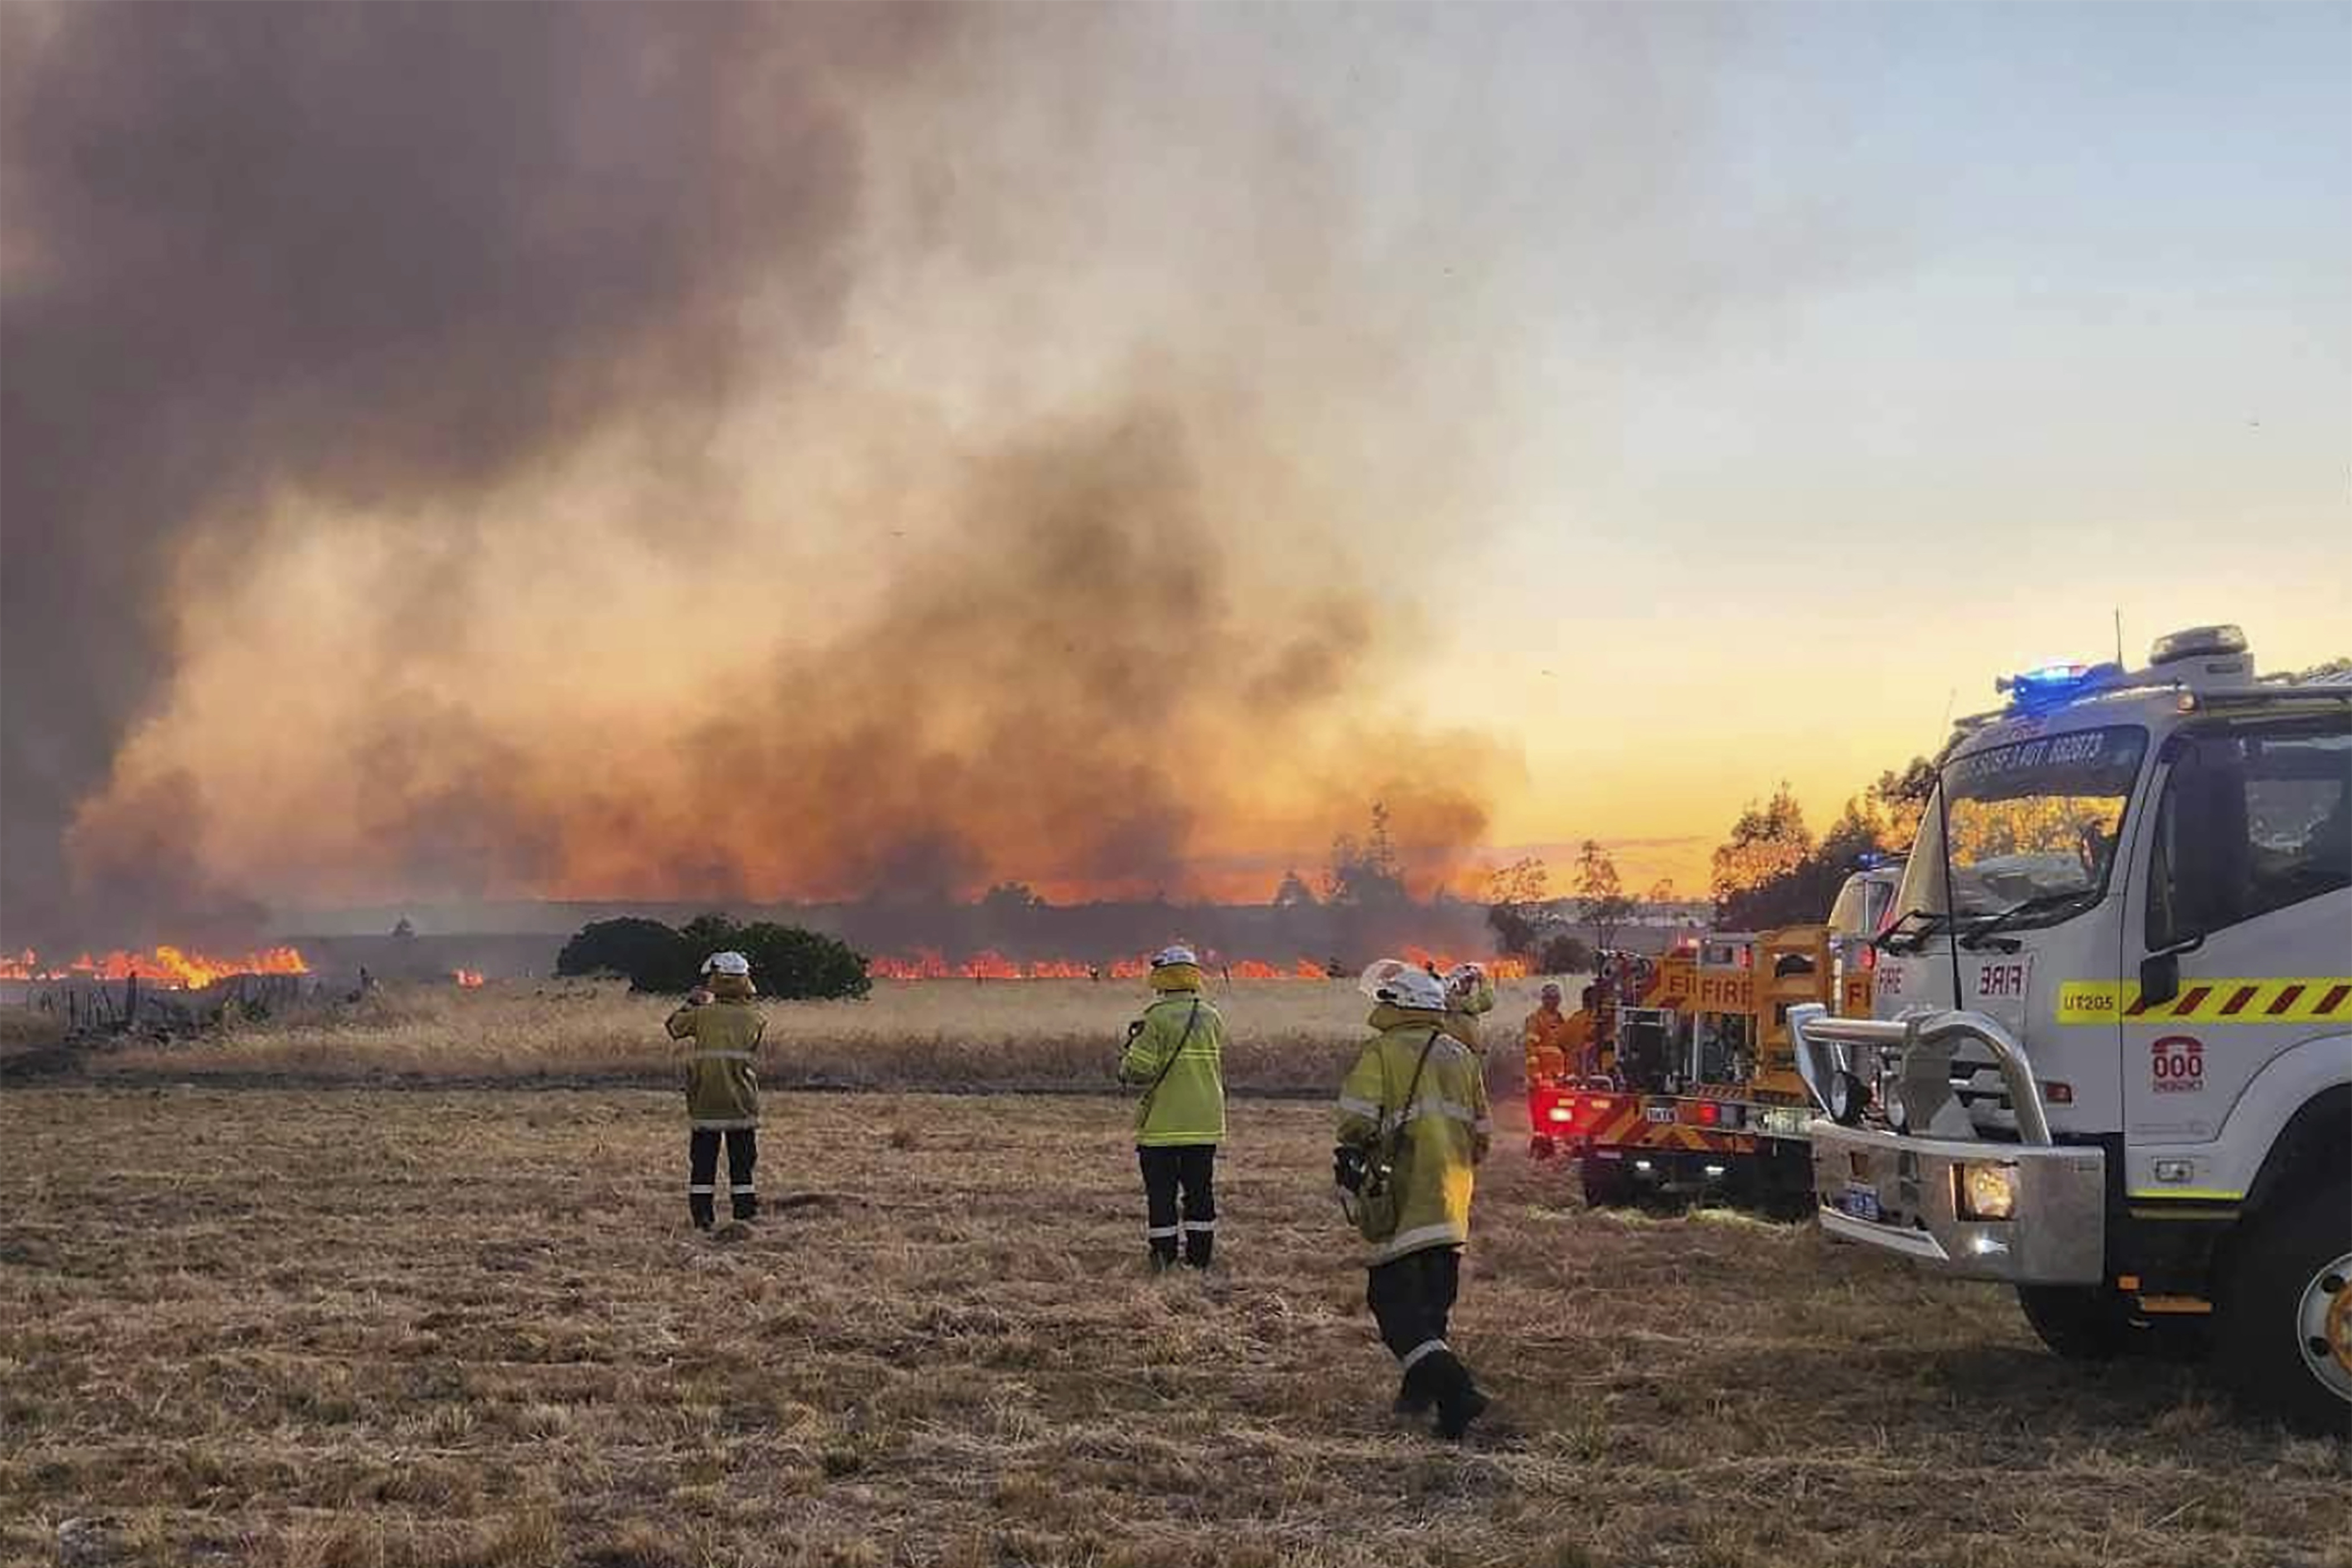 West Australian firefighters watch as grassland burns near the West Australian city of Wannaroo, north of Perth in the early hours of Thursday, Nov. 23, 2023. Dozens of residents have been evacuated and at least 10 homes have been destroyed by a wildfire that is burning out of control on the northern fringe of the west coast city of Perth during heatwave spring conditions, authorities say.(DFES via AP)